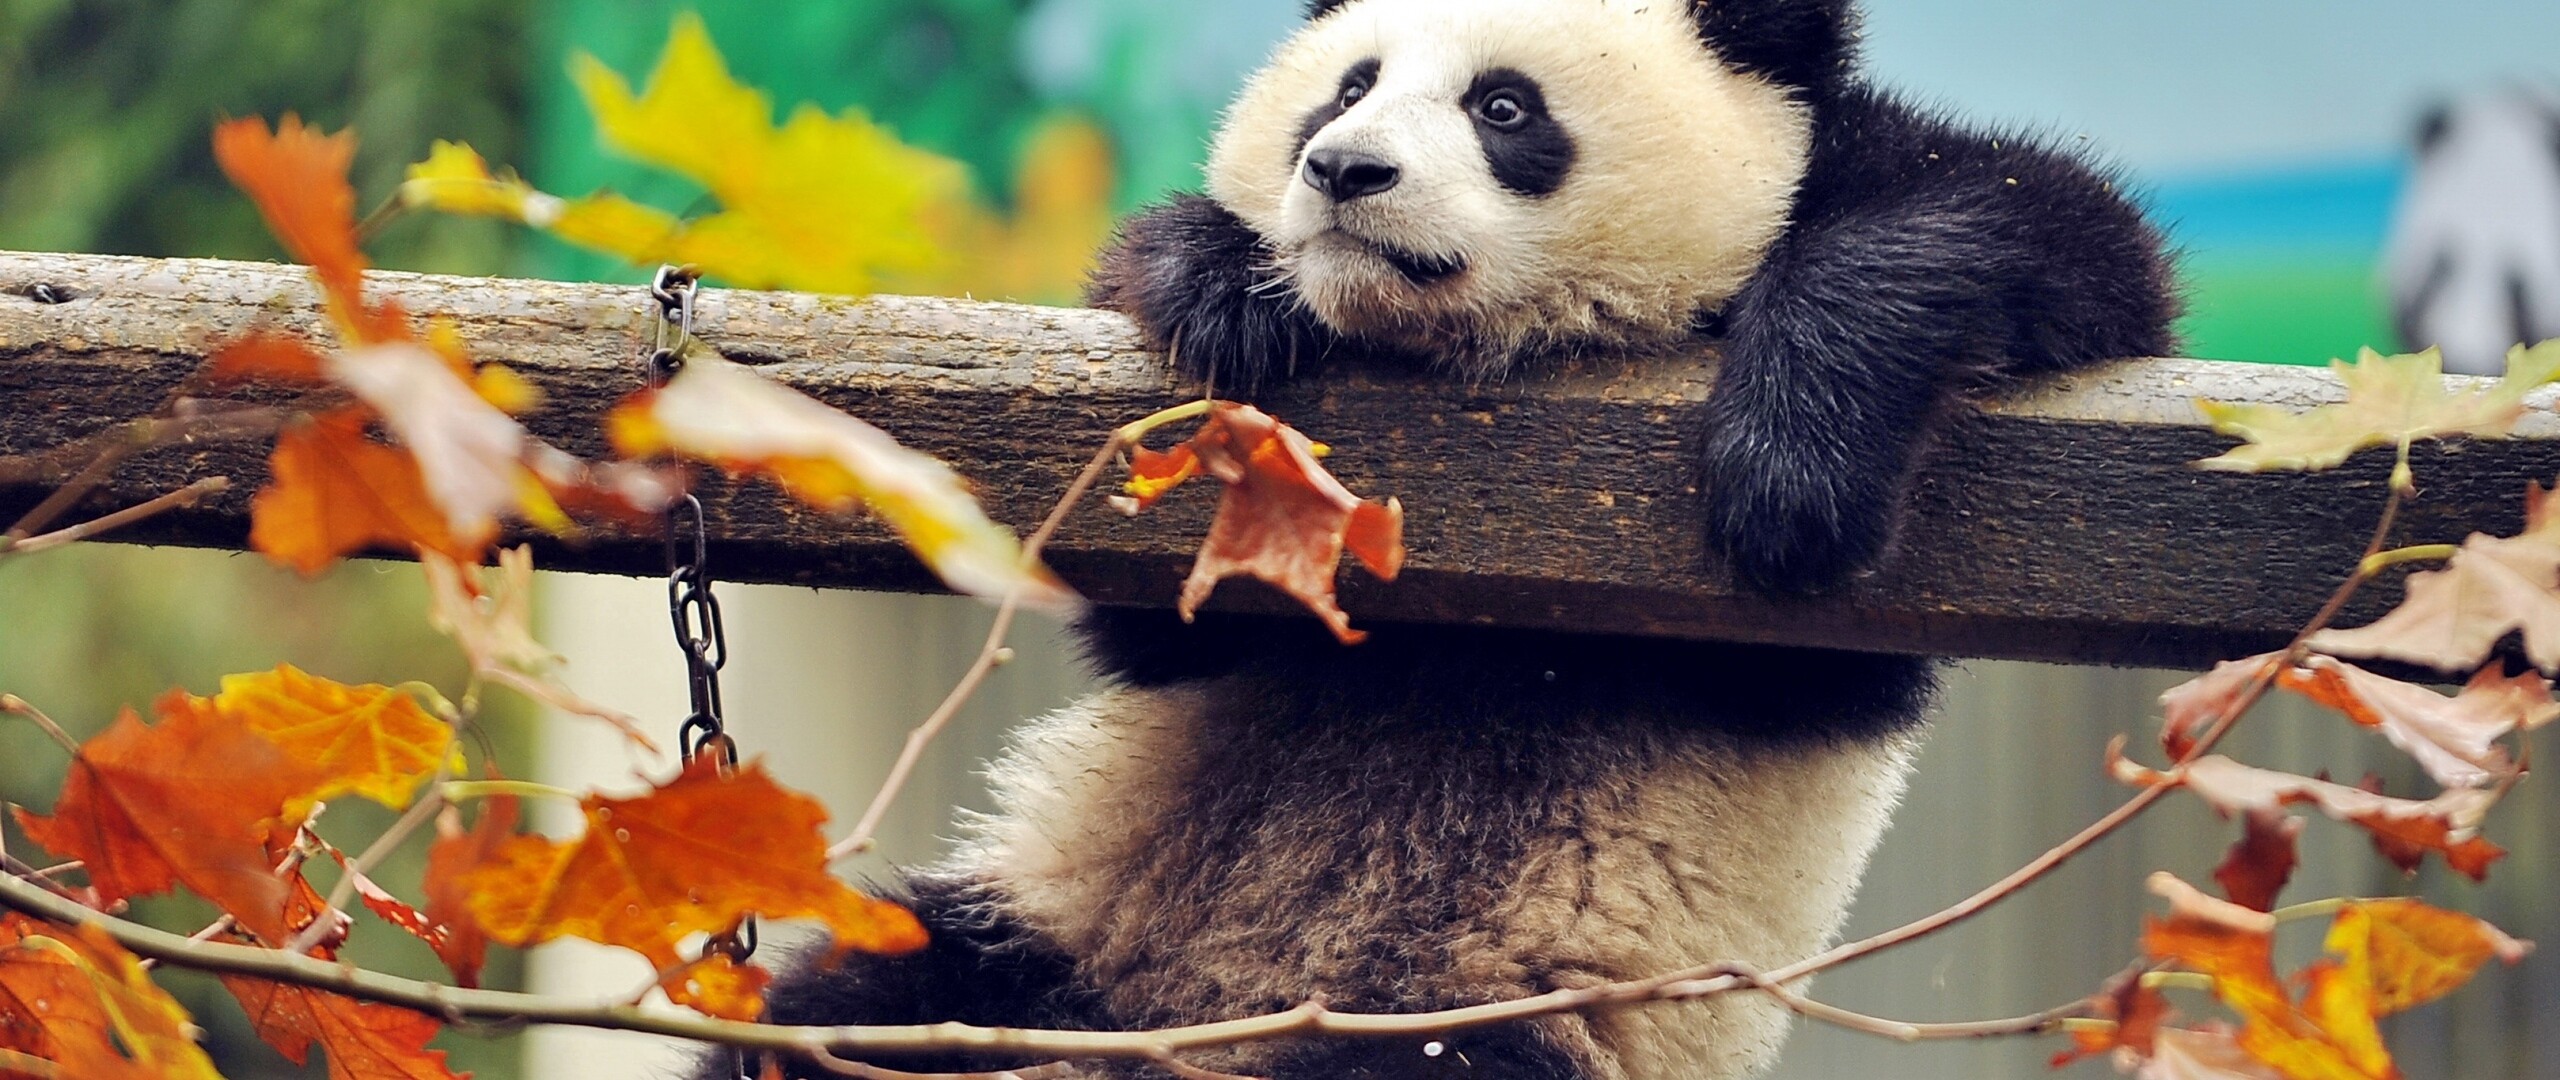 Panda: Panda’s diet consists of the leaves, shoots, and stems of bamboo. 2560x1080 Dual Screen Background.